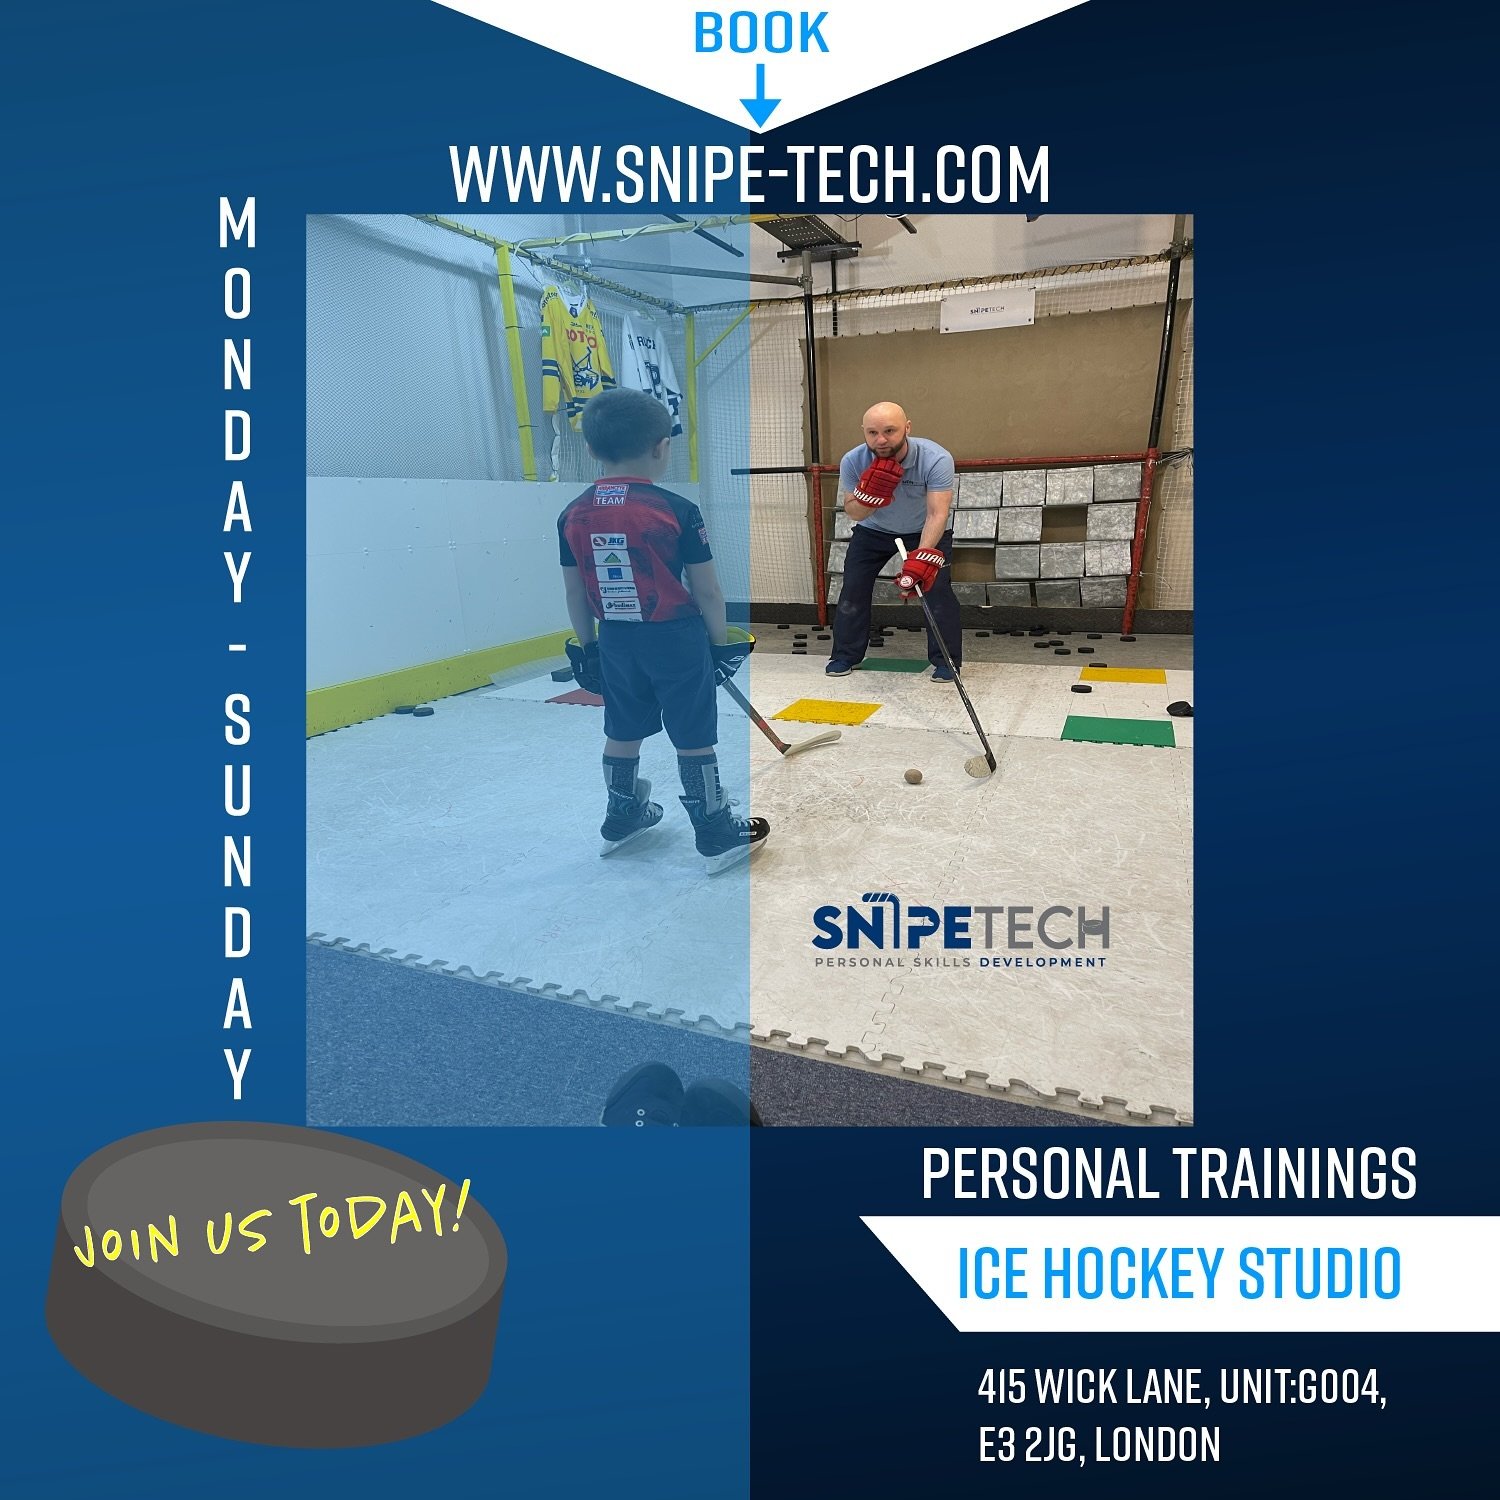 🏒Ice Hockey Studio Is Open For Your Bookings!🏒

🔗Bookings via www.snipe-tech.com or info@snipetech.co.uk

✅1-1 Coaching
✅Puck Shooting
✅Puck Control 
✅Skating Technique 
✅Physical Preparation 
✅Passing
✅Any Age/Level
✅Pet friendly
✅Changing Rooms/